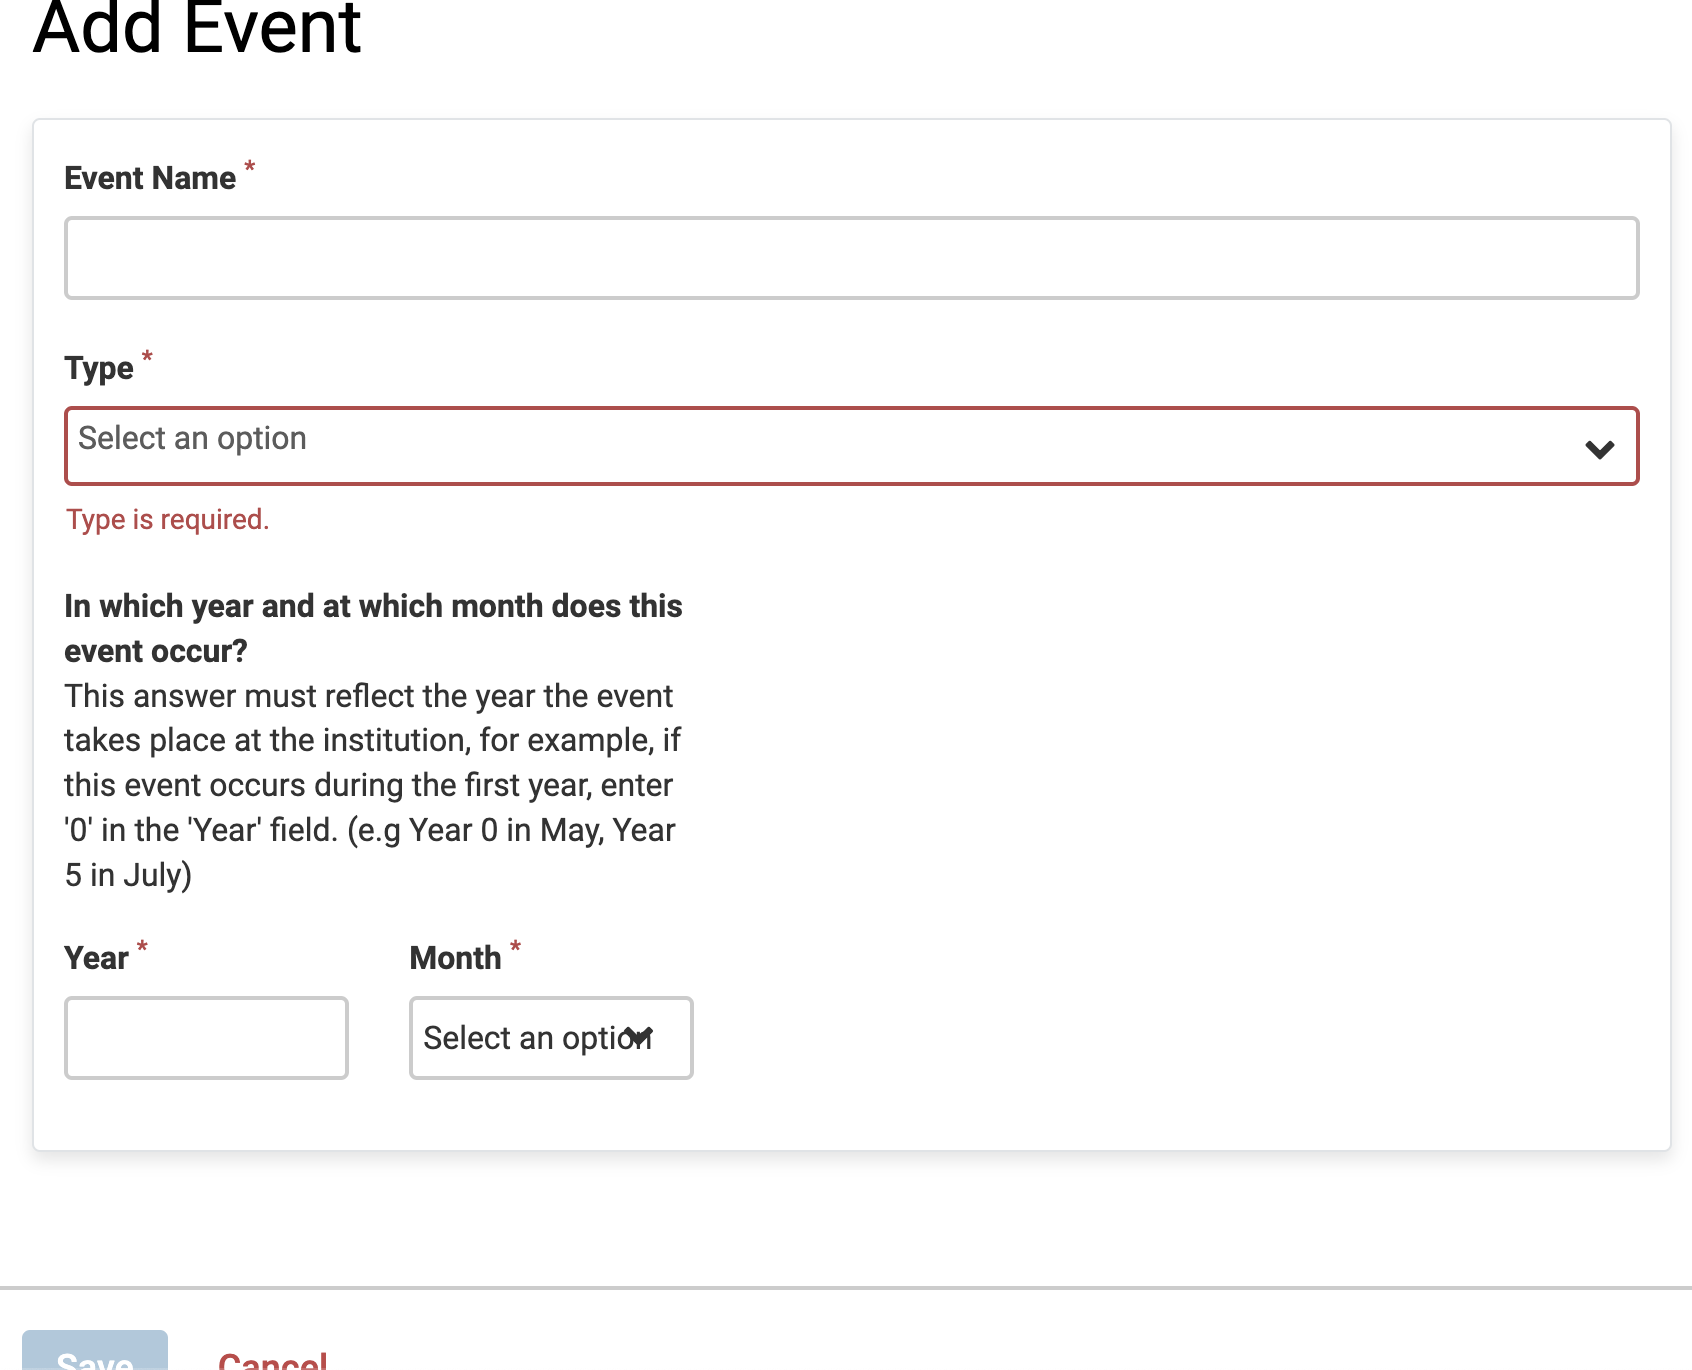 Add Event section with Event Name field, Type dropdown, and Year field below with Save button at the bottom